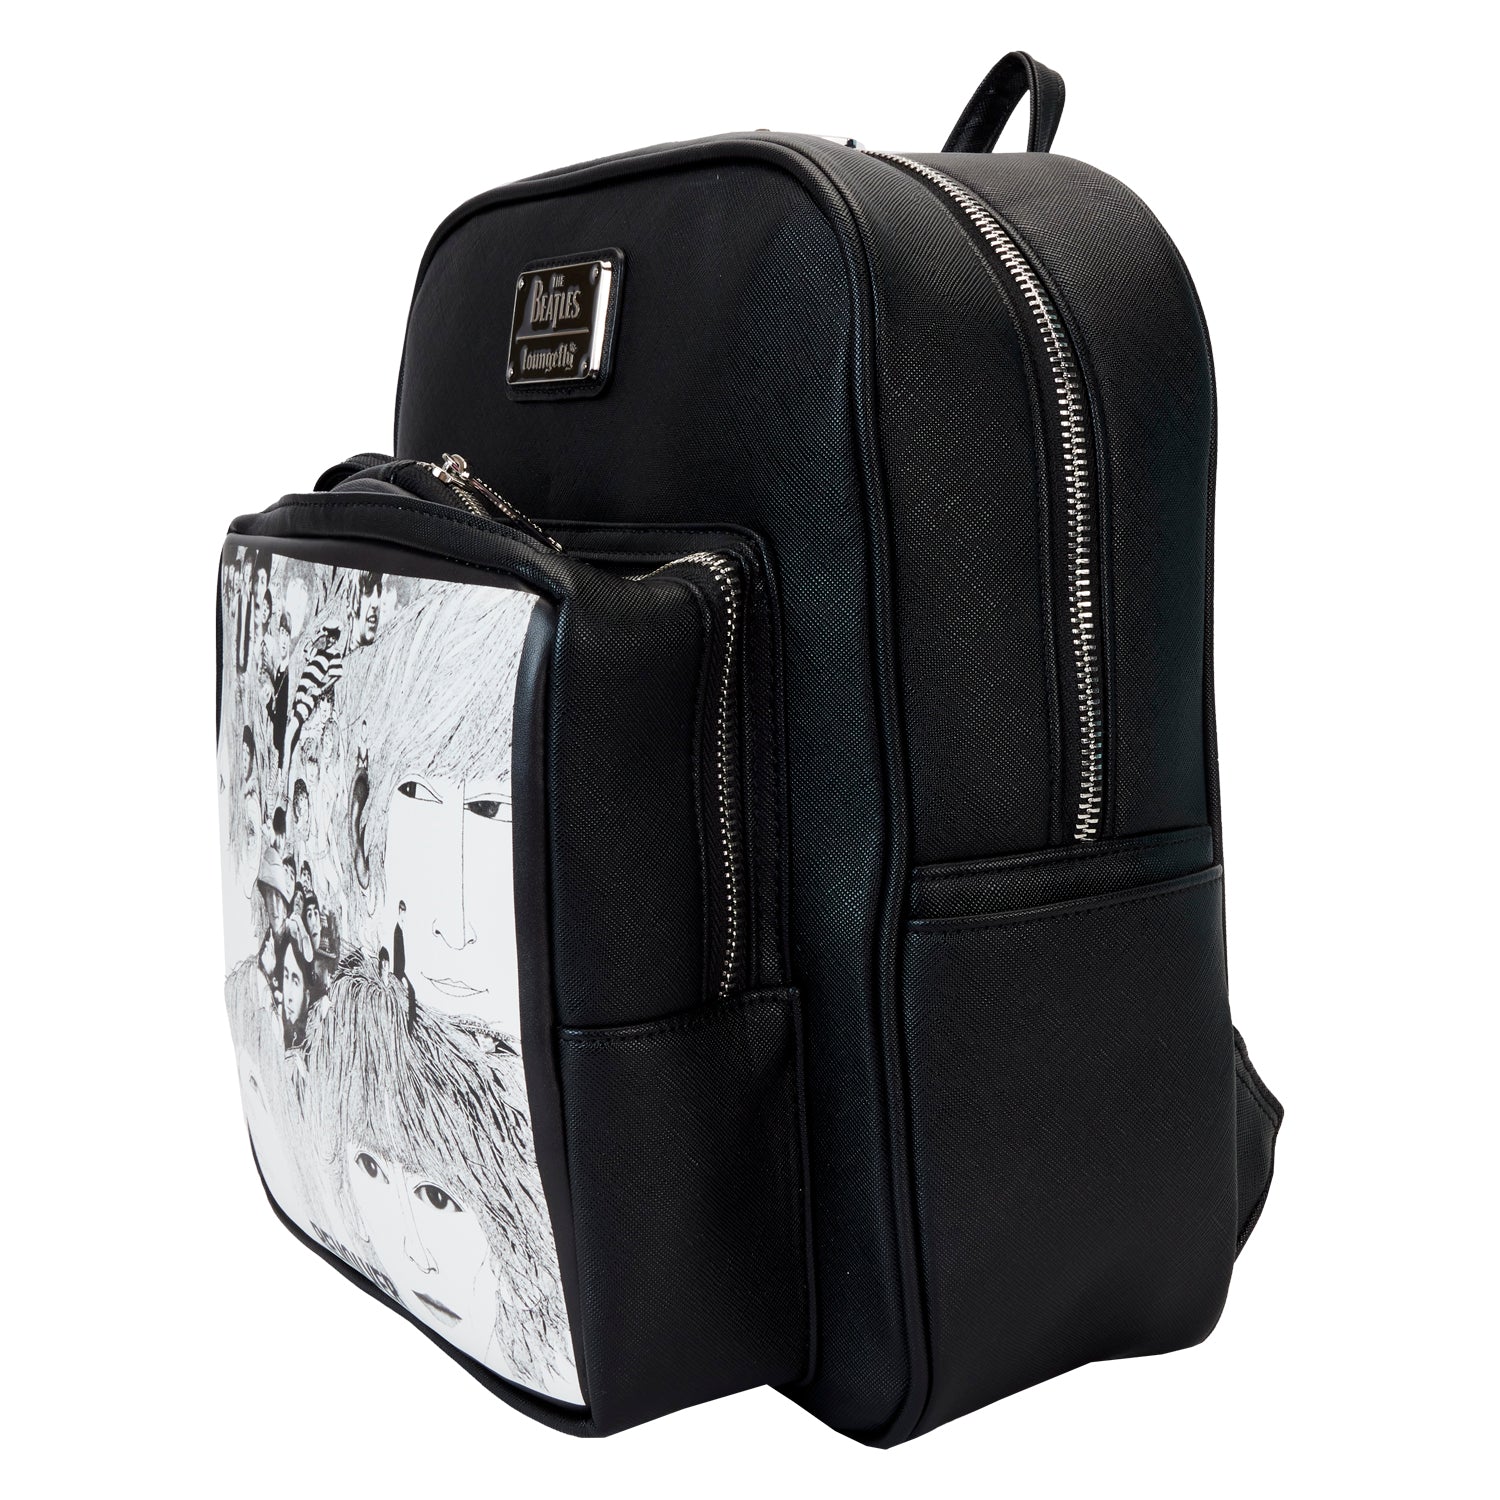 Loungefly x The Beatles Revolver Album with Record Pouch Mini Backpack